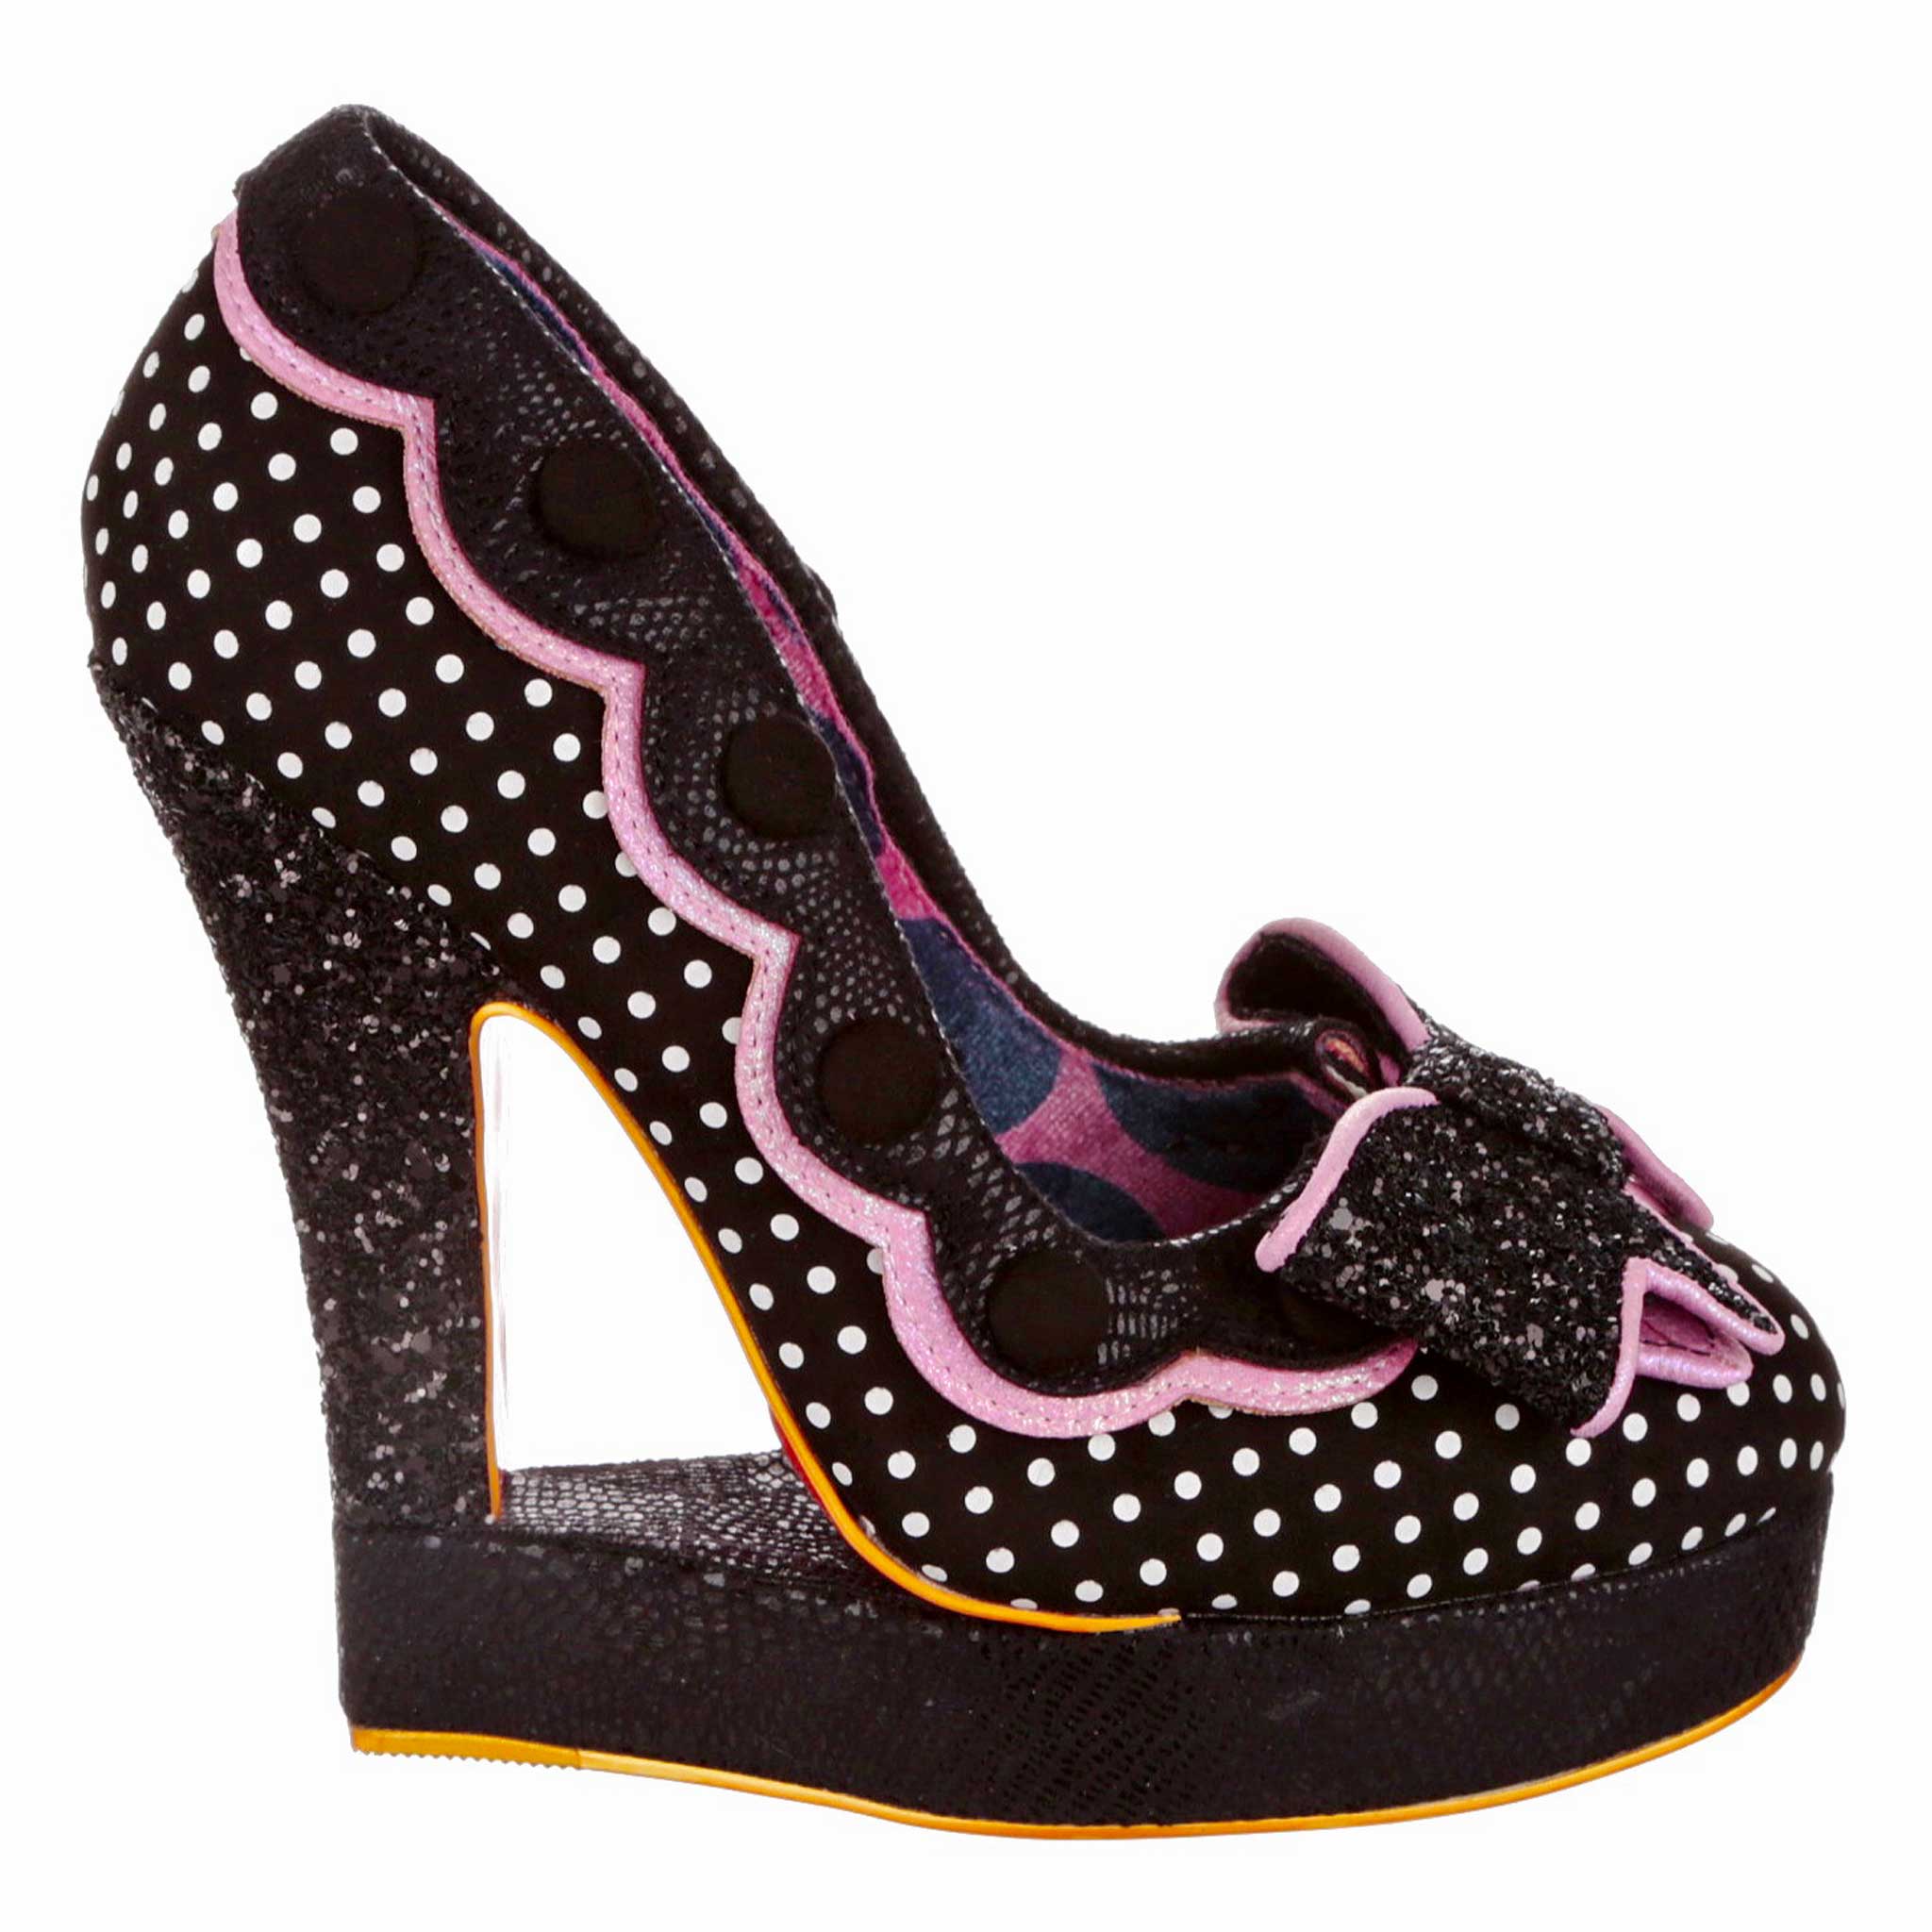 Nick Of Time Wide Fit, Black Glitter High Heels